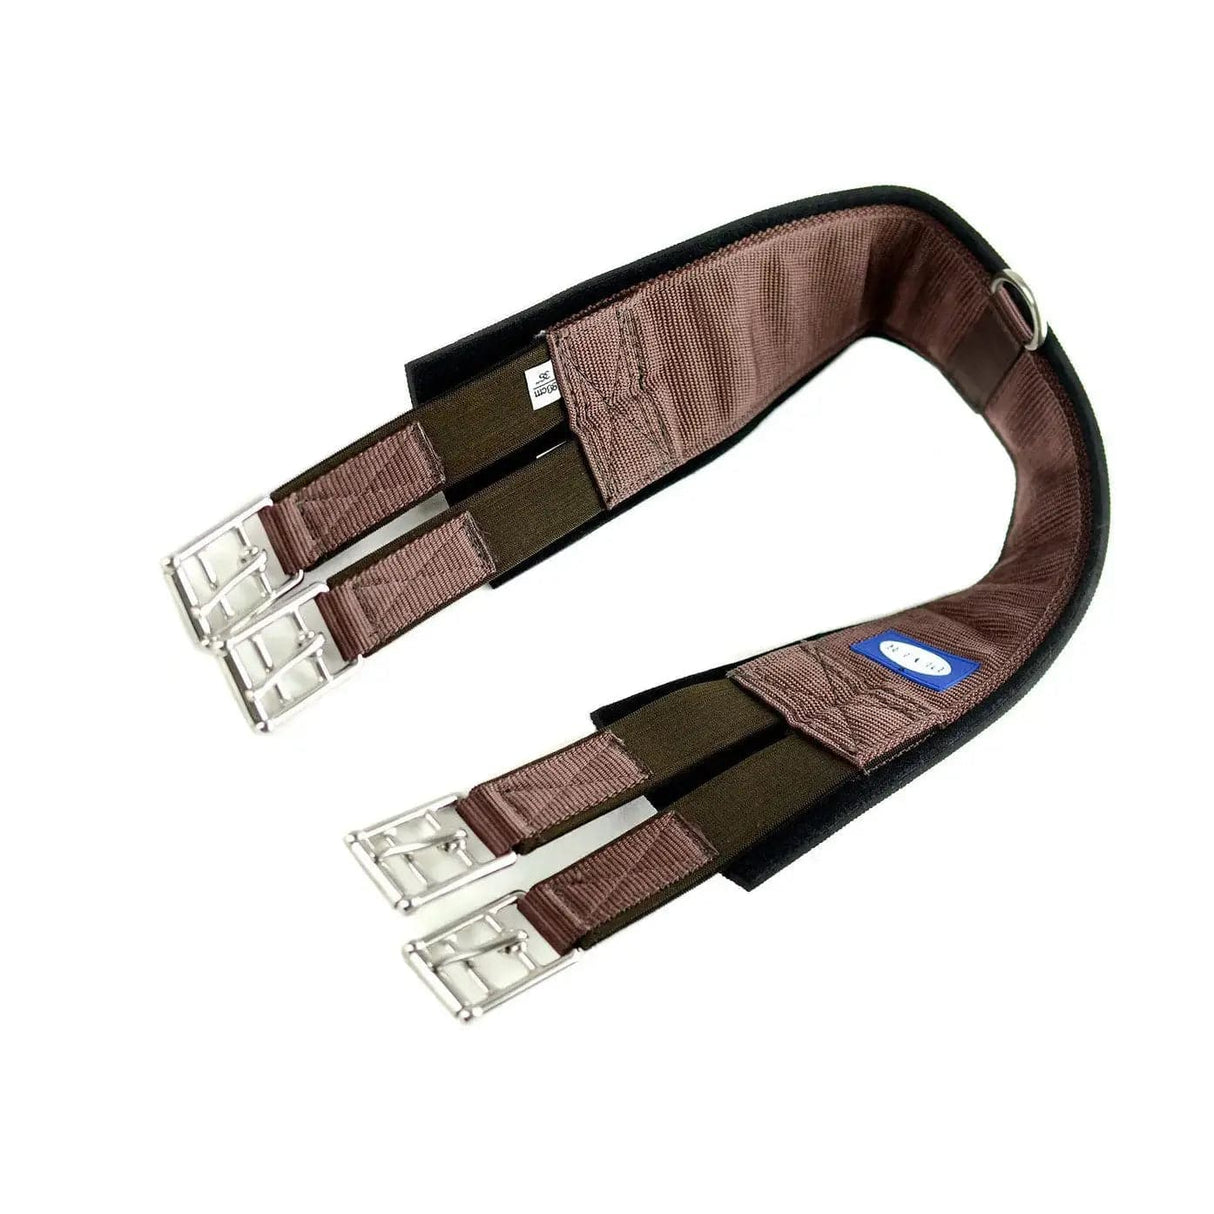 Dever Competition Girth With Elastic Both Ends 36" Black Dever Girths Barnstaple Equestrian Supplies